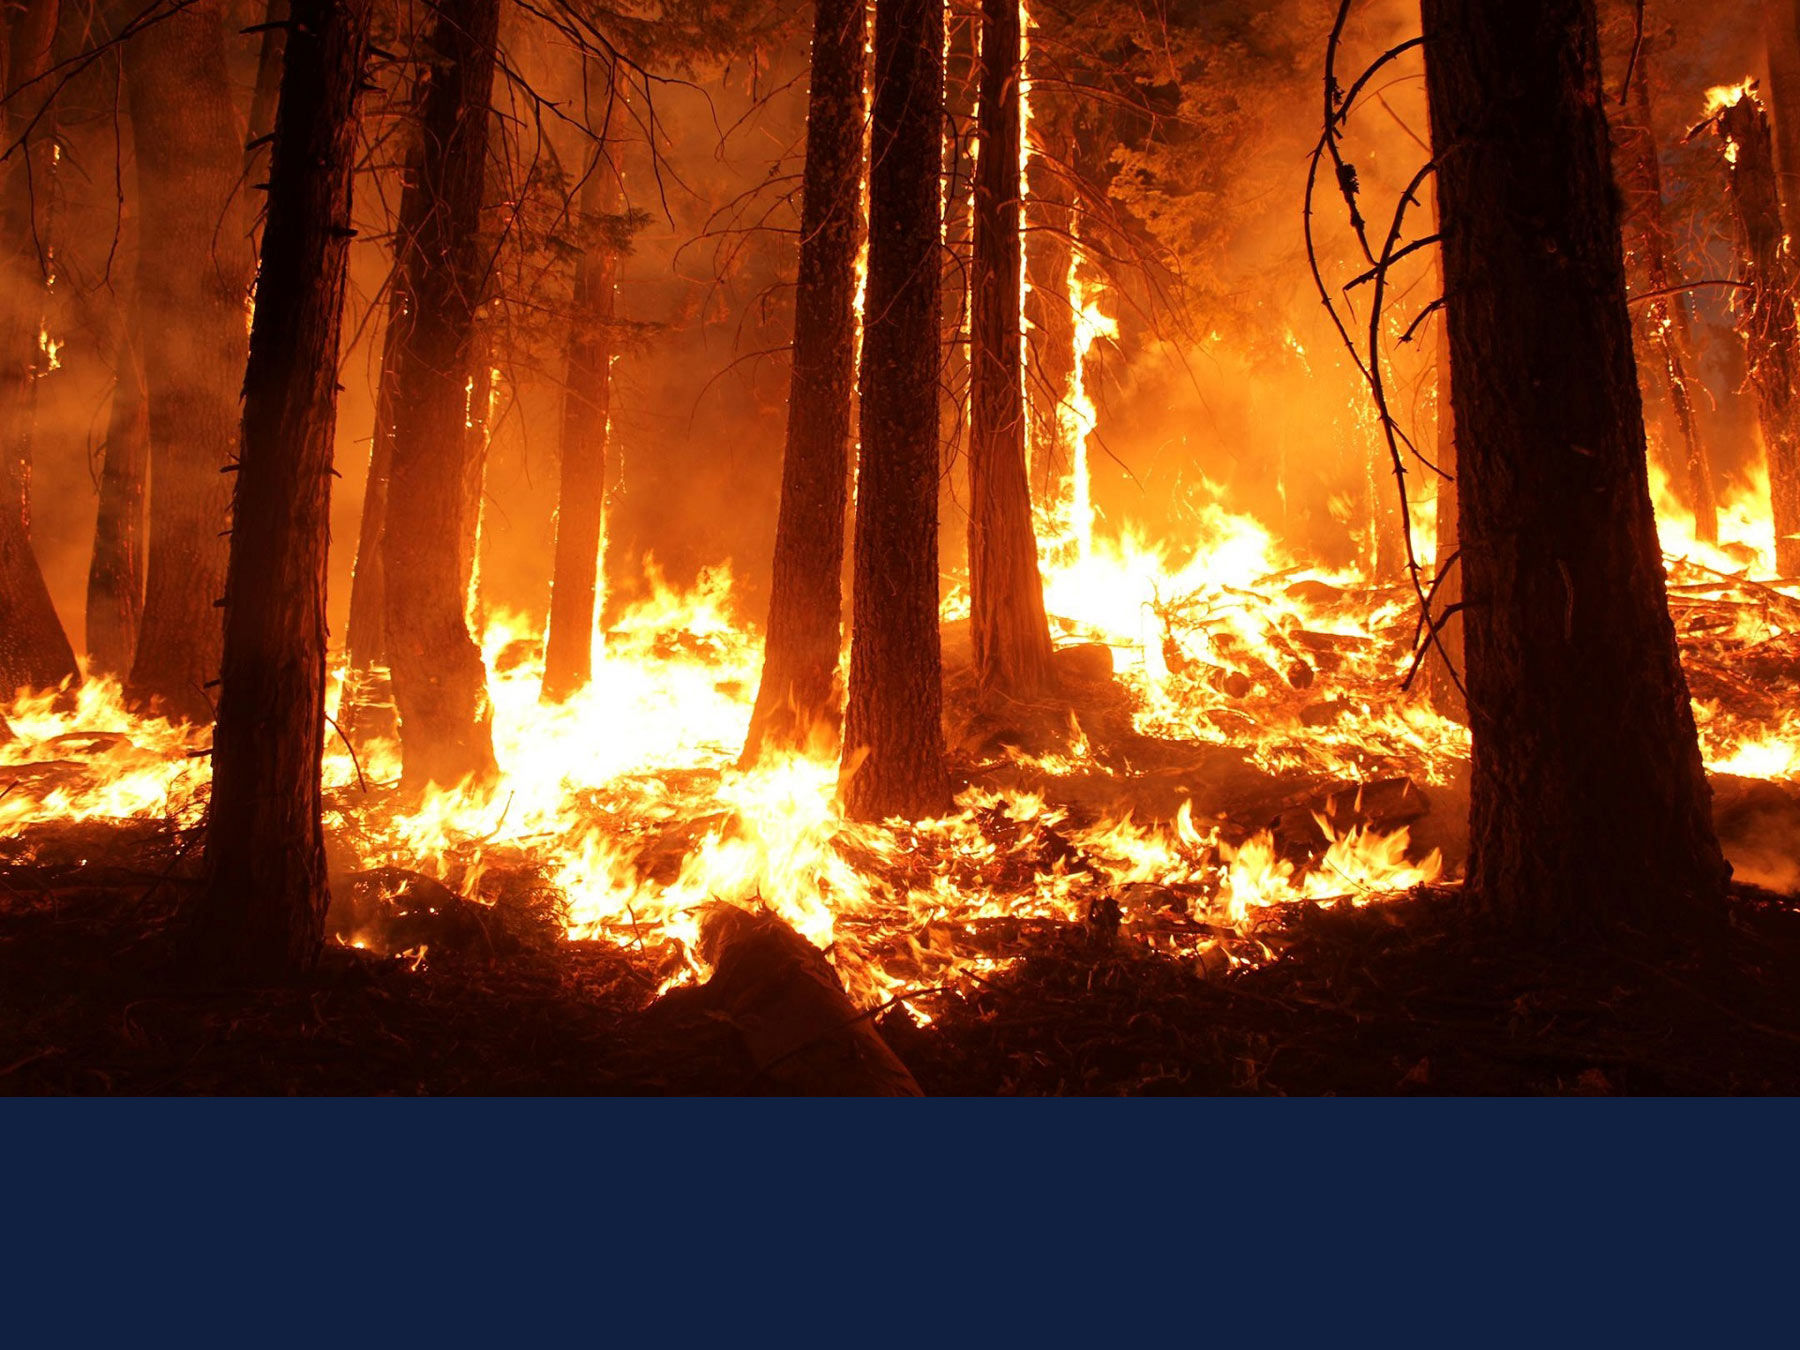 inside a wildfire in a wooded area with groundcoverings and trees burning. No photo credit given.